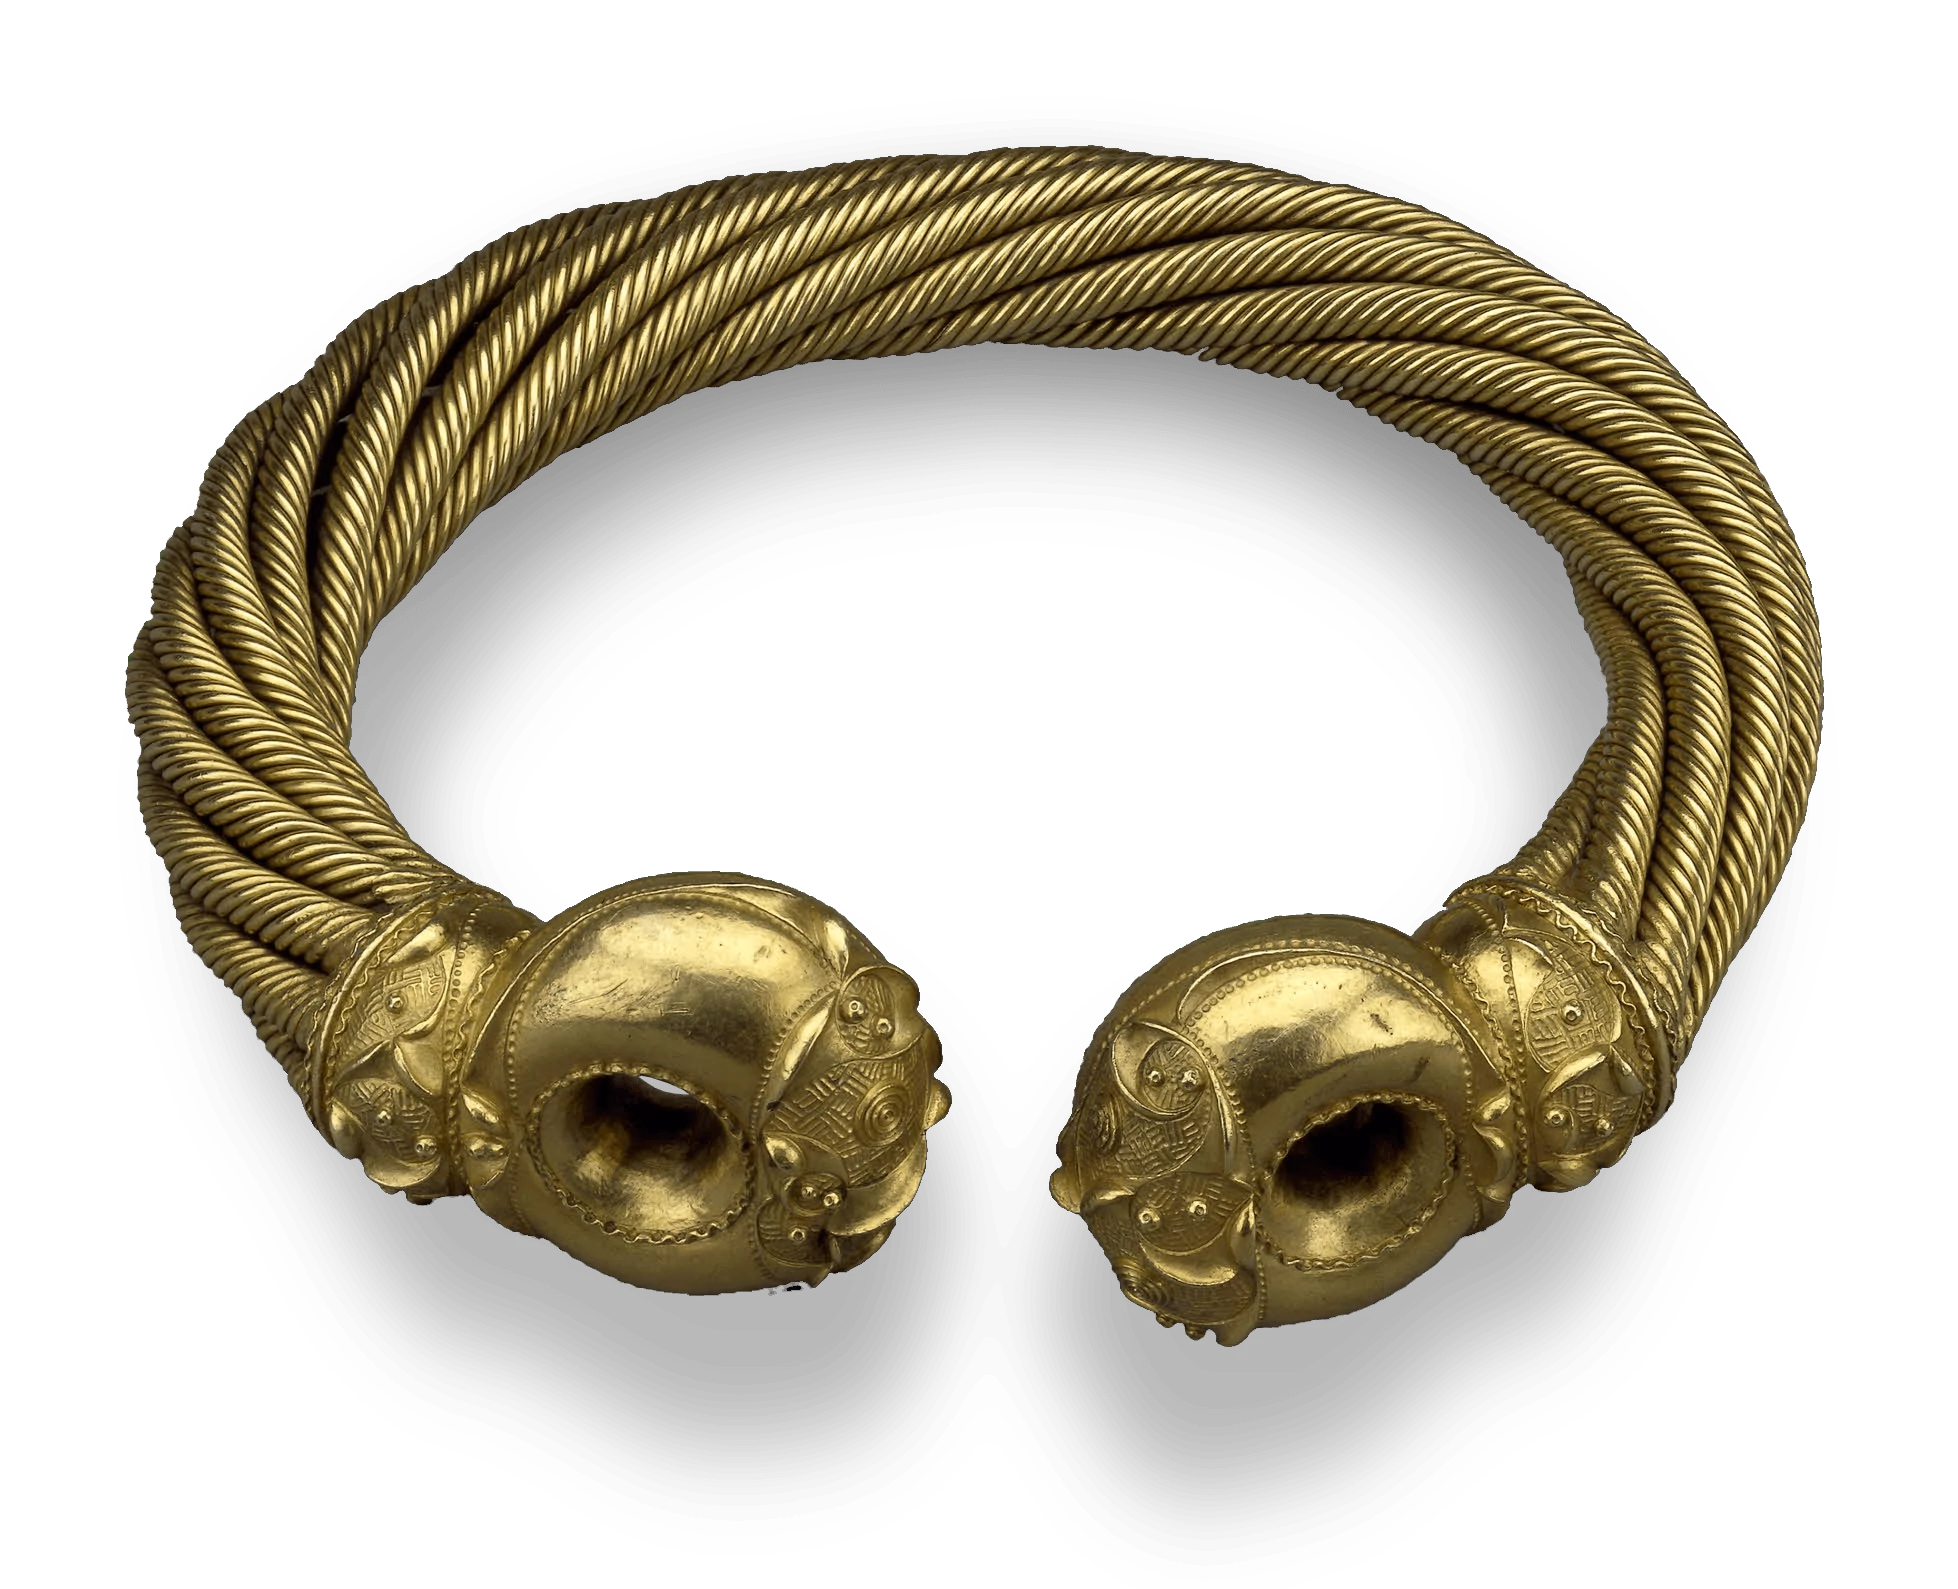 The Snettisham Great Torc, The Celts